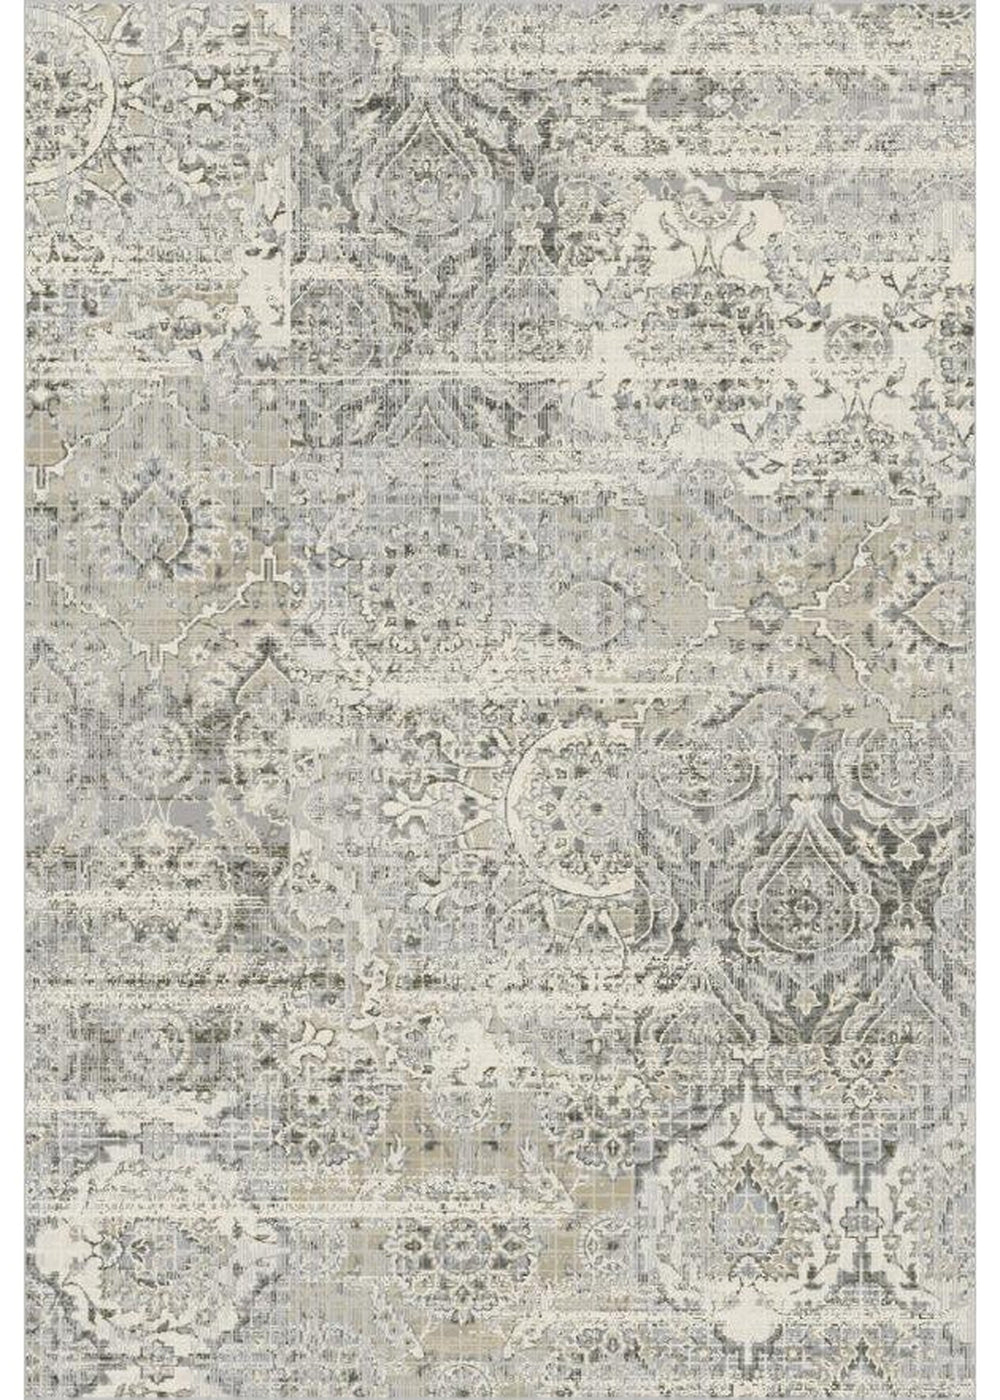 Timeless Woven Rug-Area rug for living room, dining area, and bedroom